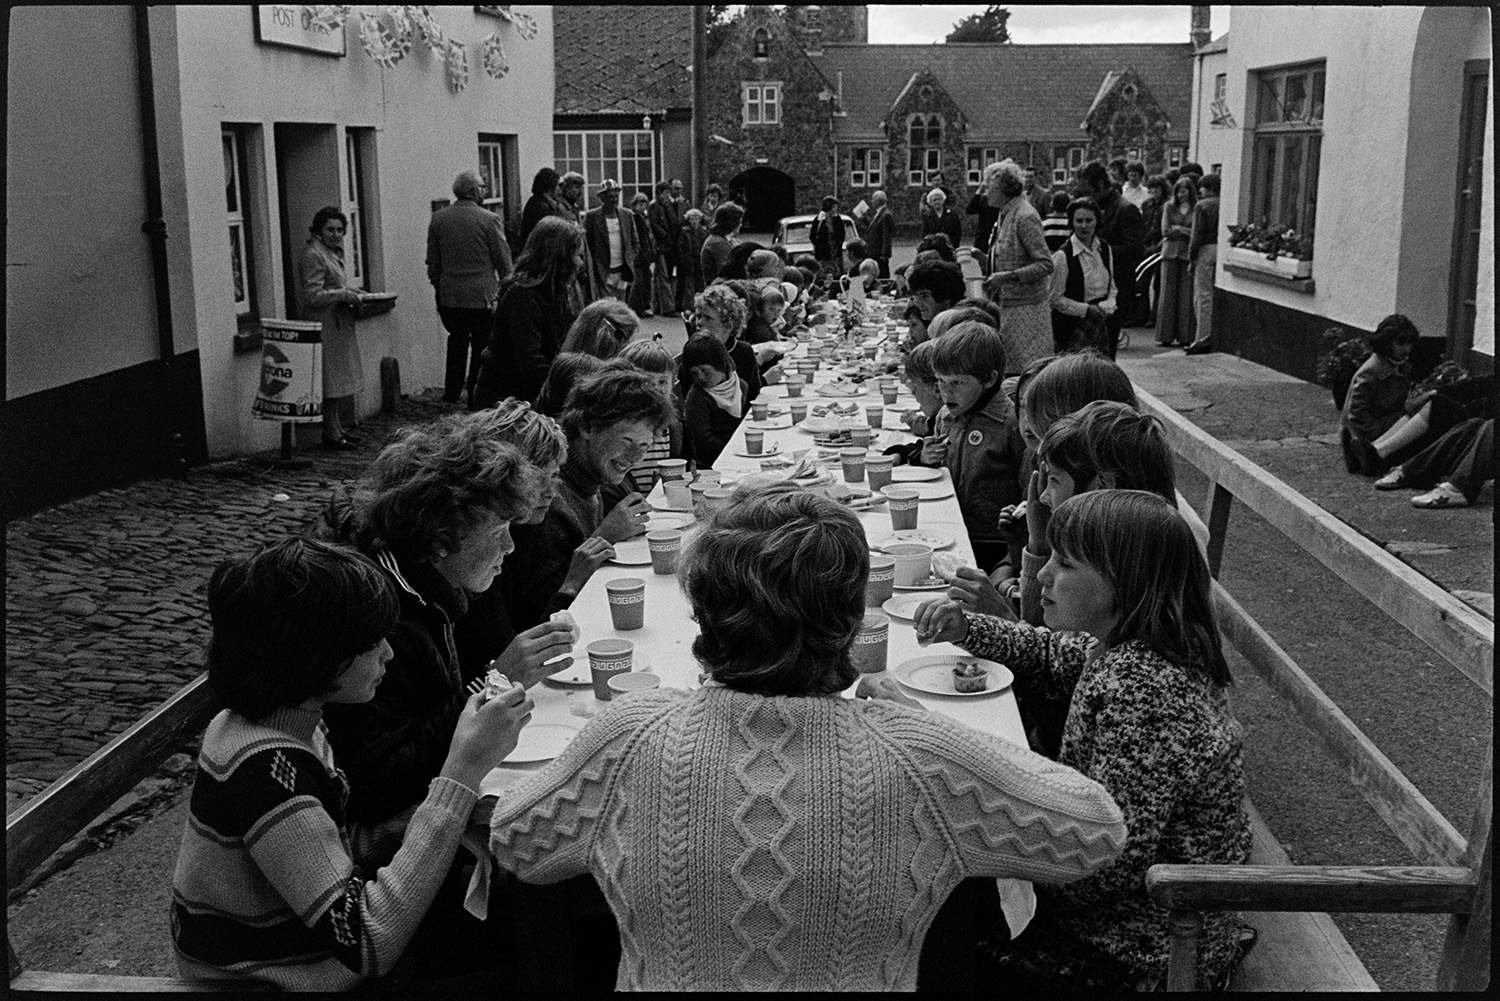 Children's tea in village street, Jubilee Day. 
[Children sat a trestle tables having tea in the street outside High Bickington Post Office to celebrate the Silver Jubilee of Queen Elizabeth II. The Post Office is decorated with bunting and people are stood in the street. High Bickington Primary School can be seen in the background.]